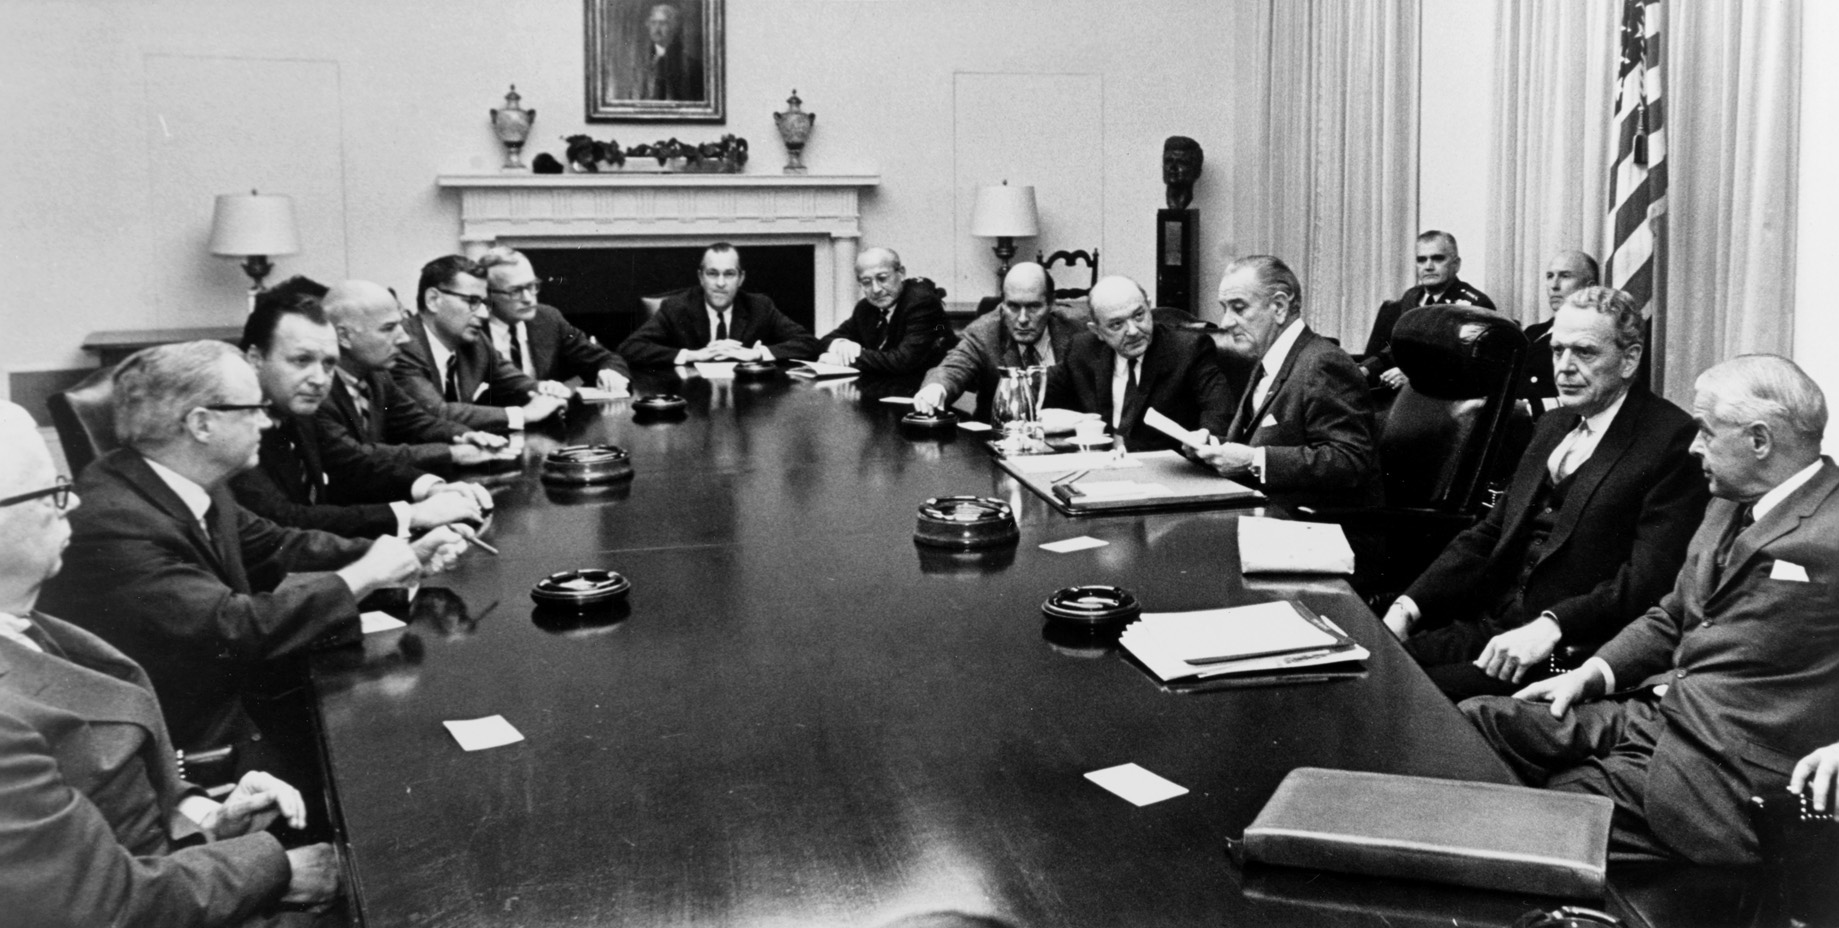 President Lyndon Johnson, shown with top advisors, hoped over the course of the 44-month bombing campaign to compel Ho Chi Minh to enter peace talks, but the North Vietnamese leader steadfastly refused to negotiate. 